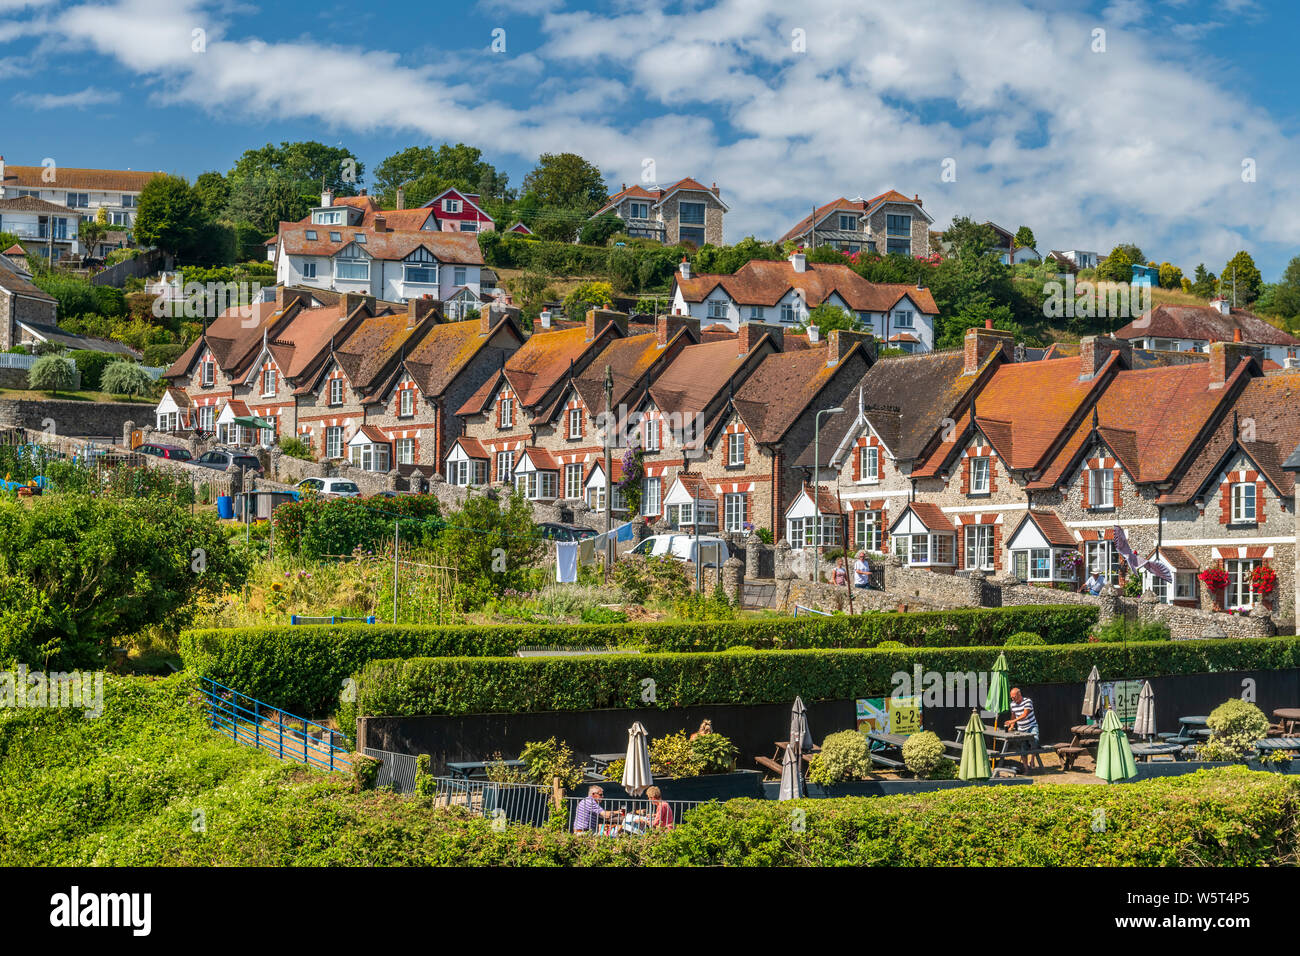 A picturesque row of cottages along 'The Meadows' in the East Devon seaside village of Beer. Stock Photo